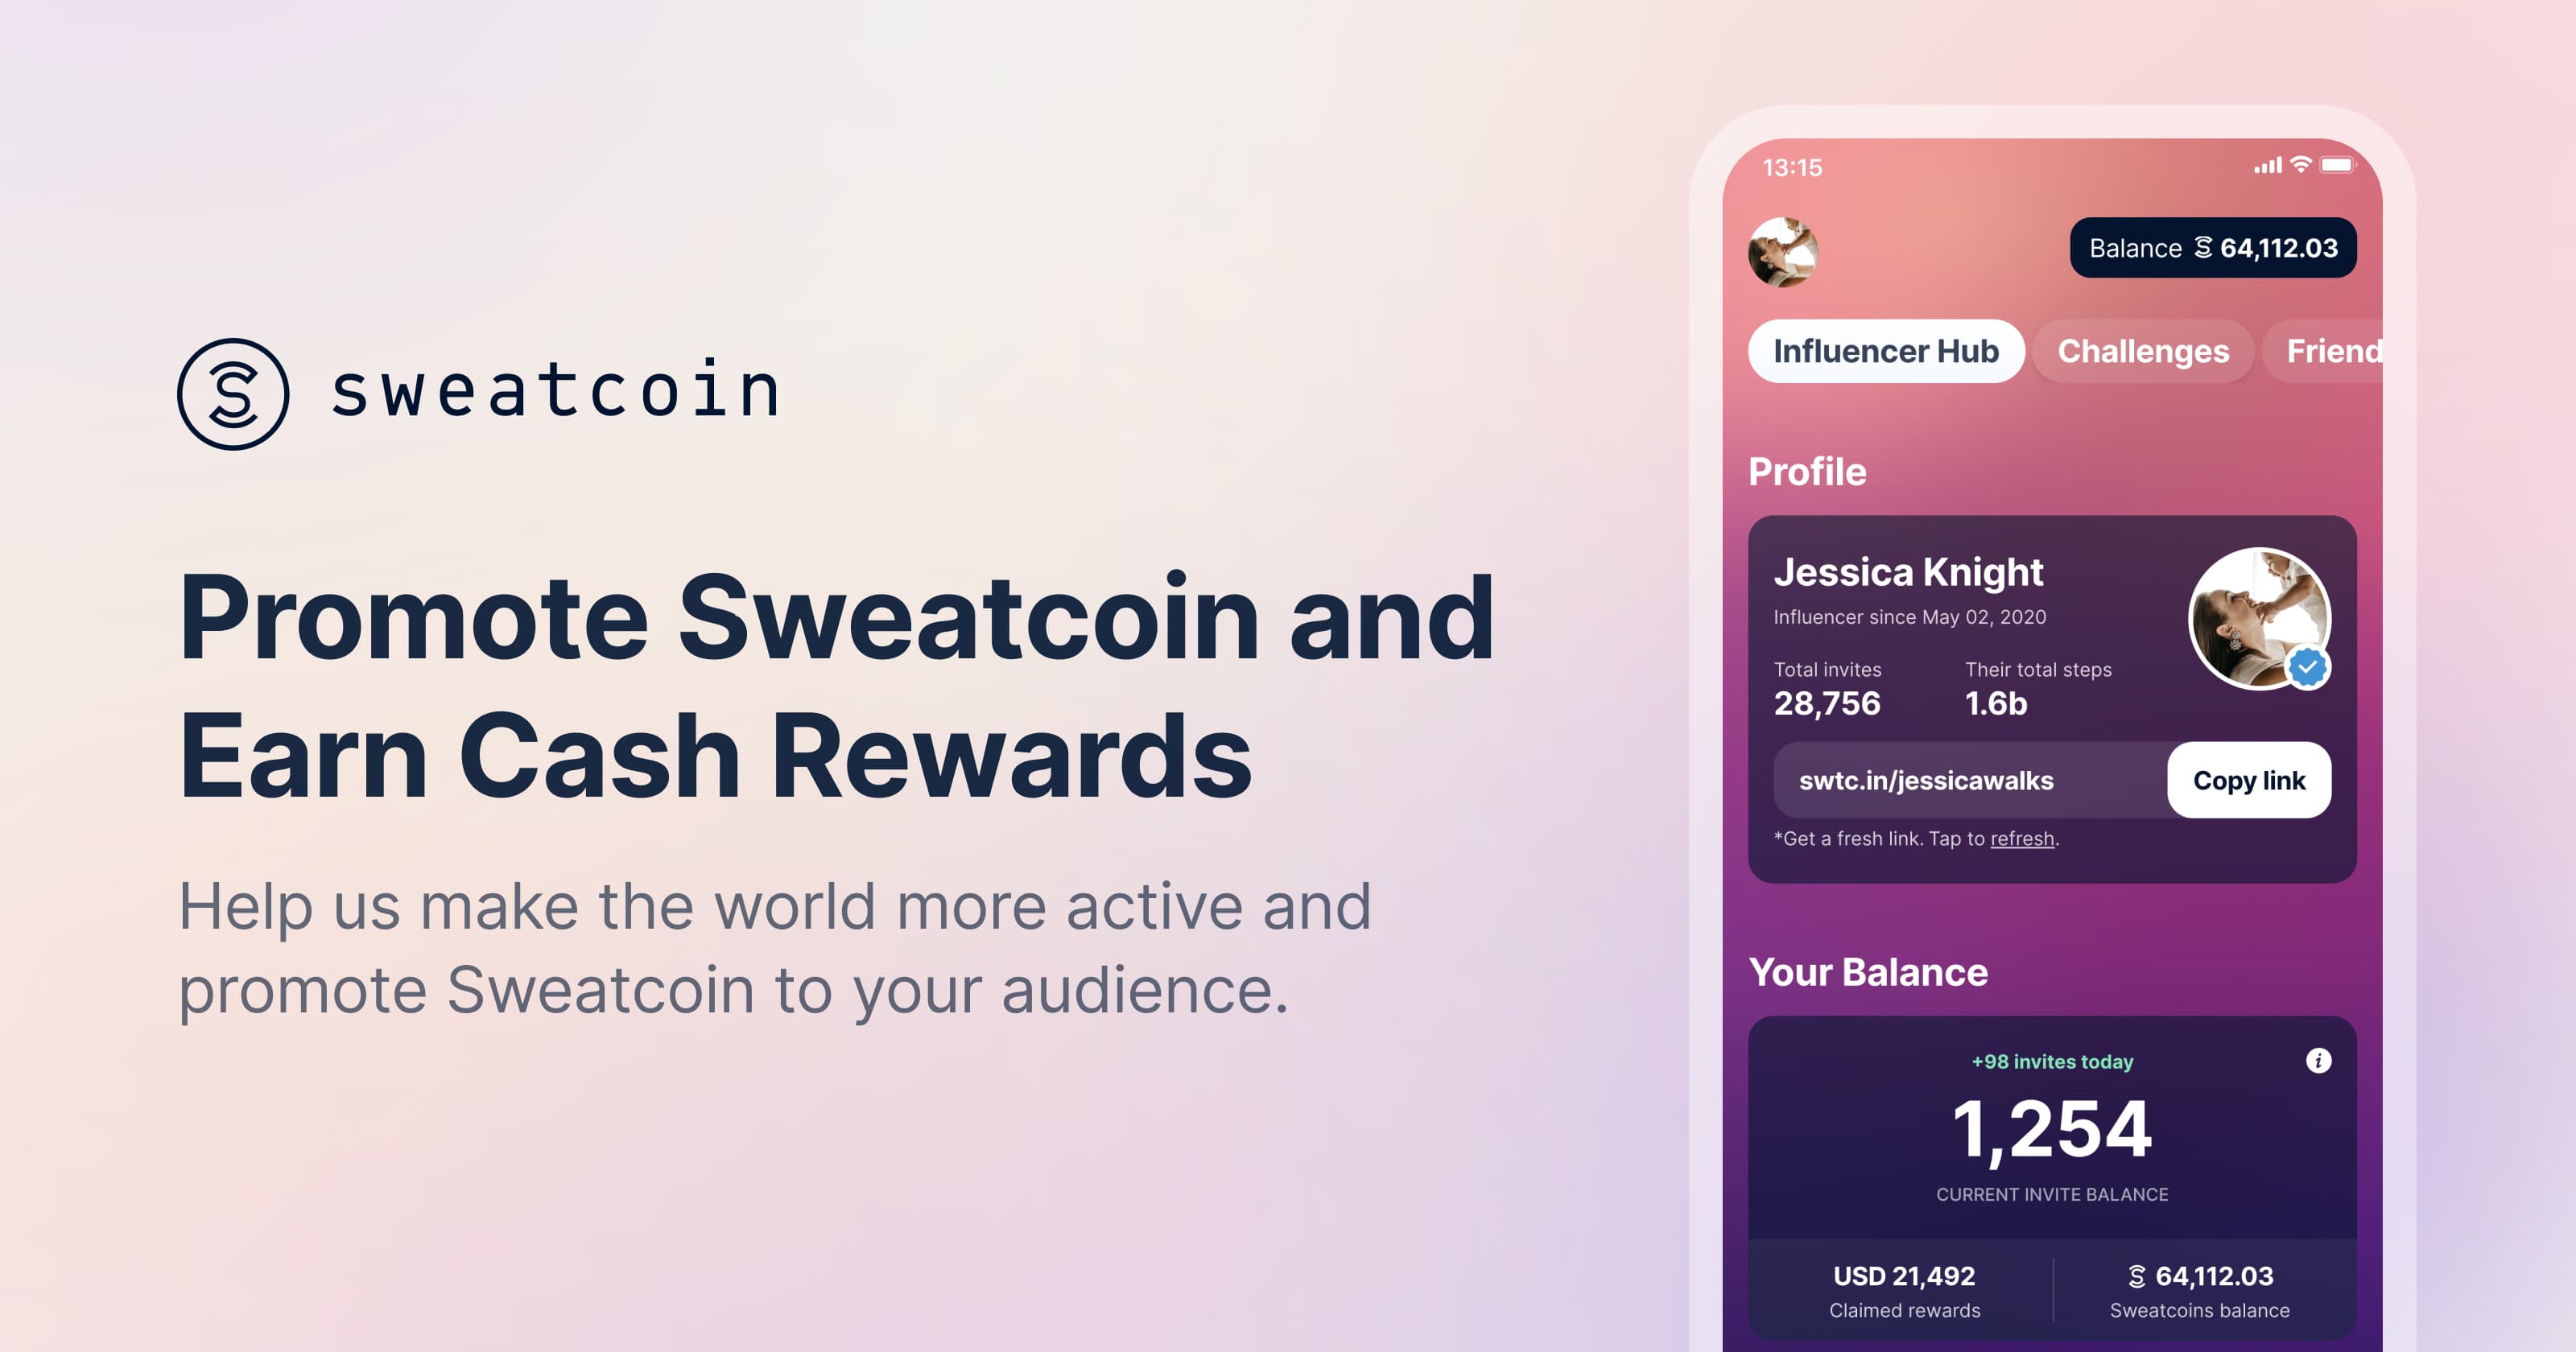 How To Transfer Sweatcoin Money to PayPal & Cash App